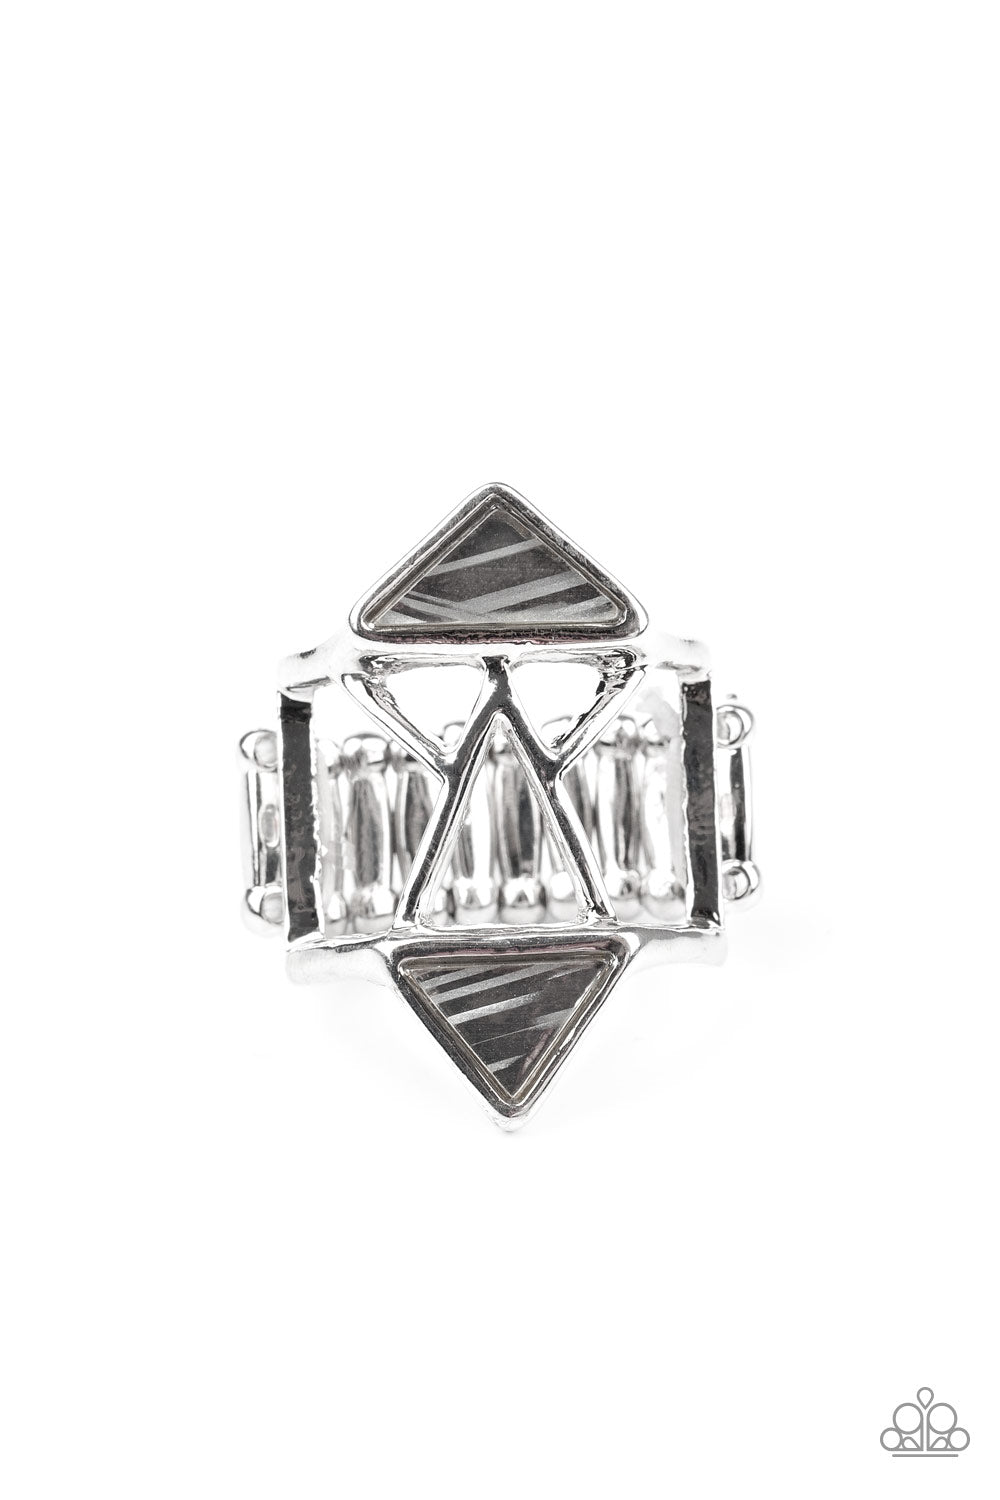 Making Me Edgy - silver - Paparazzi ring